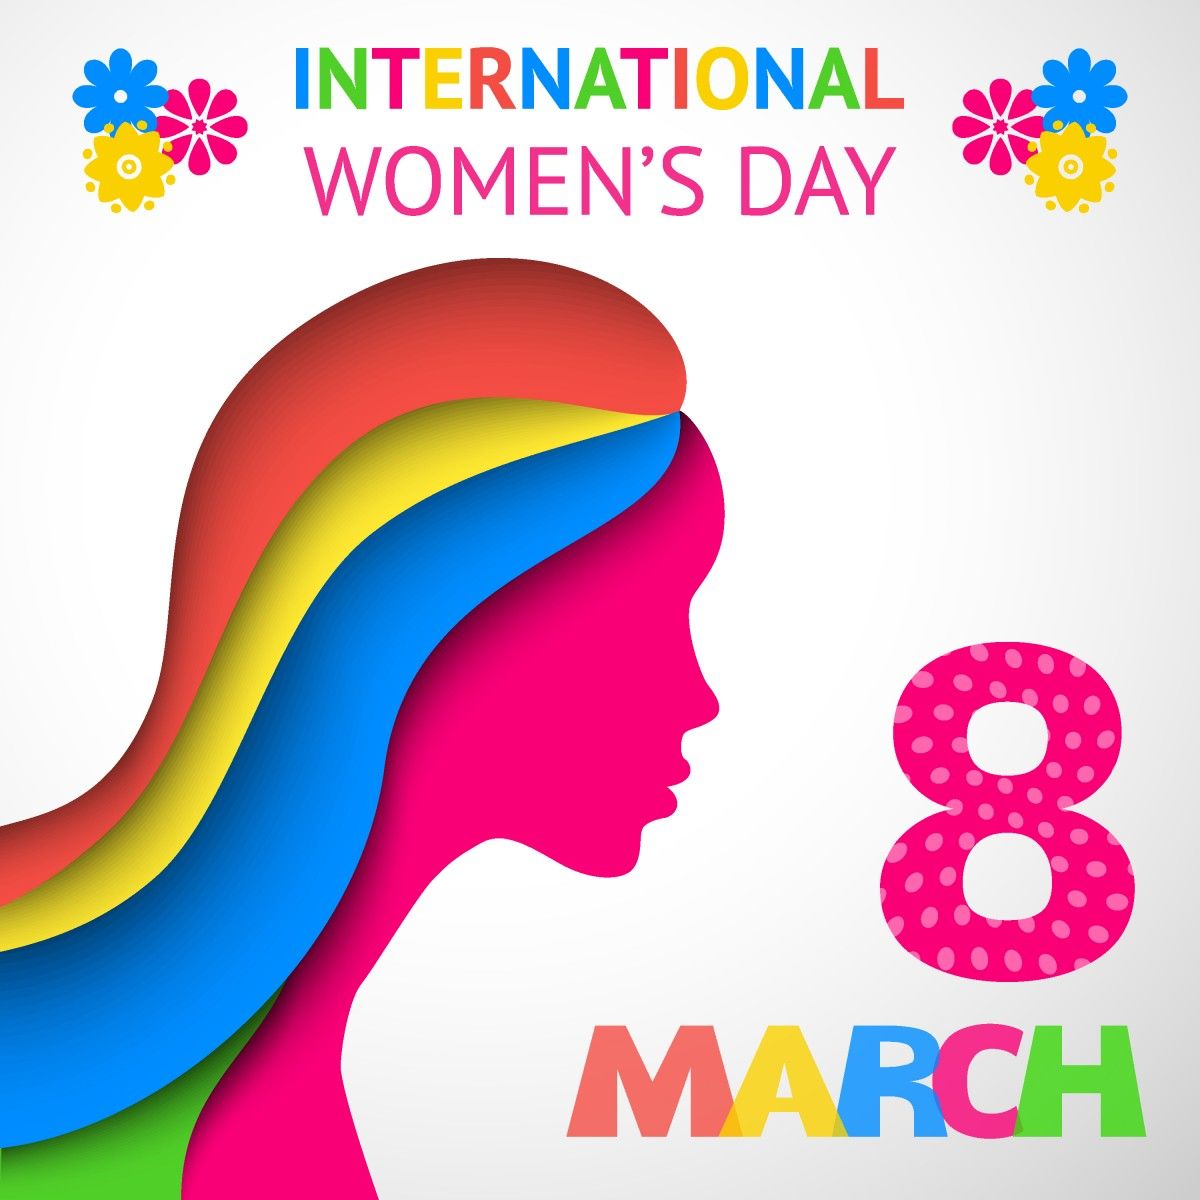 Women's Day Celebration Ideas And Image Collection With Quotes